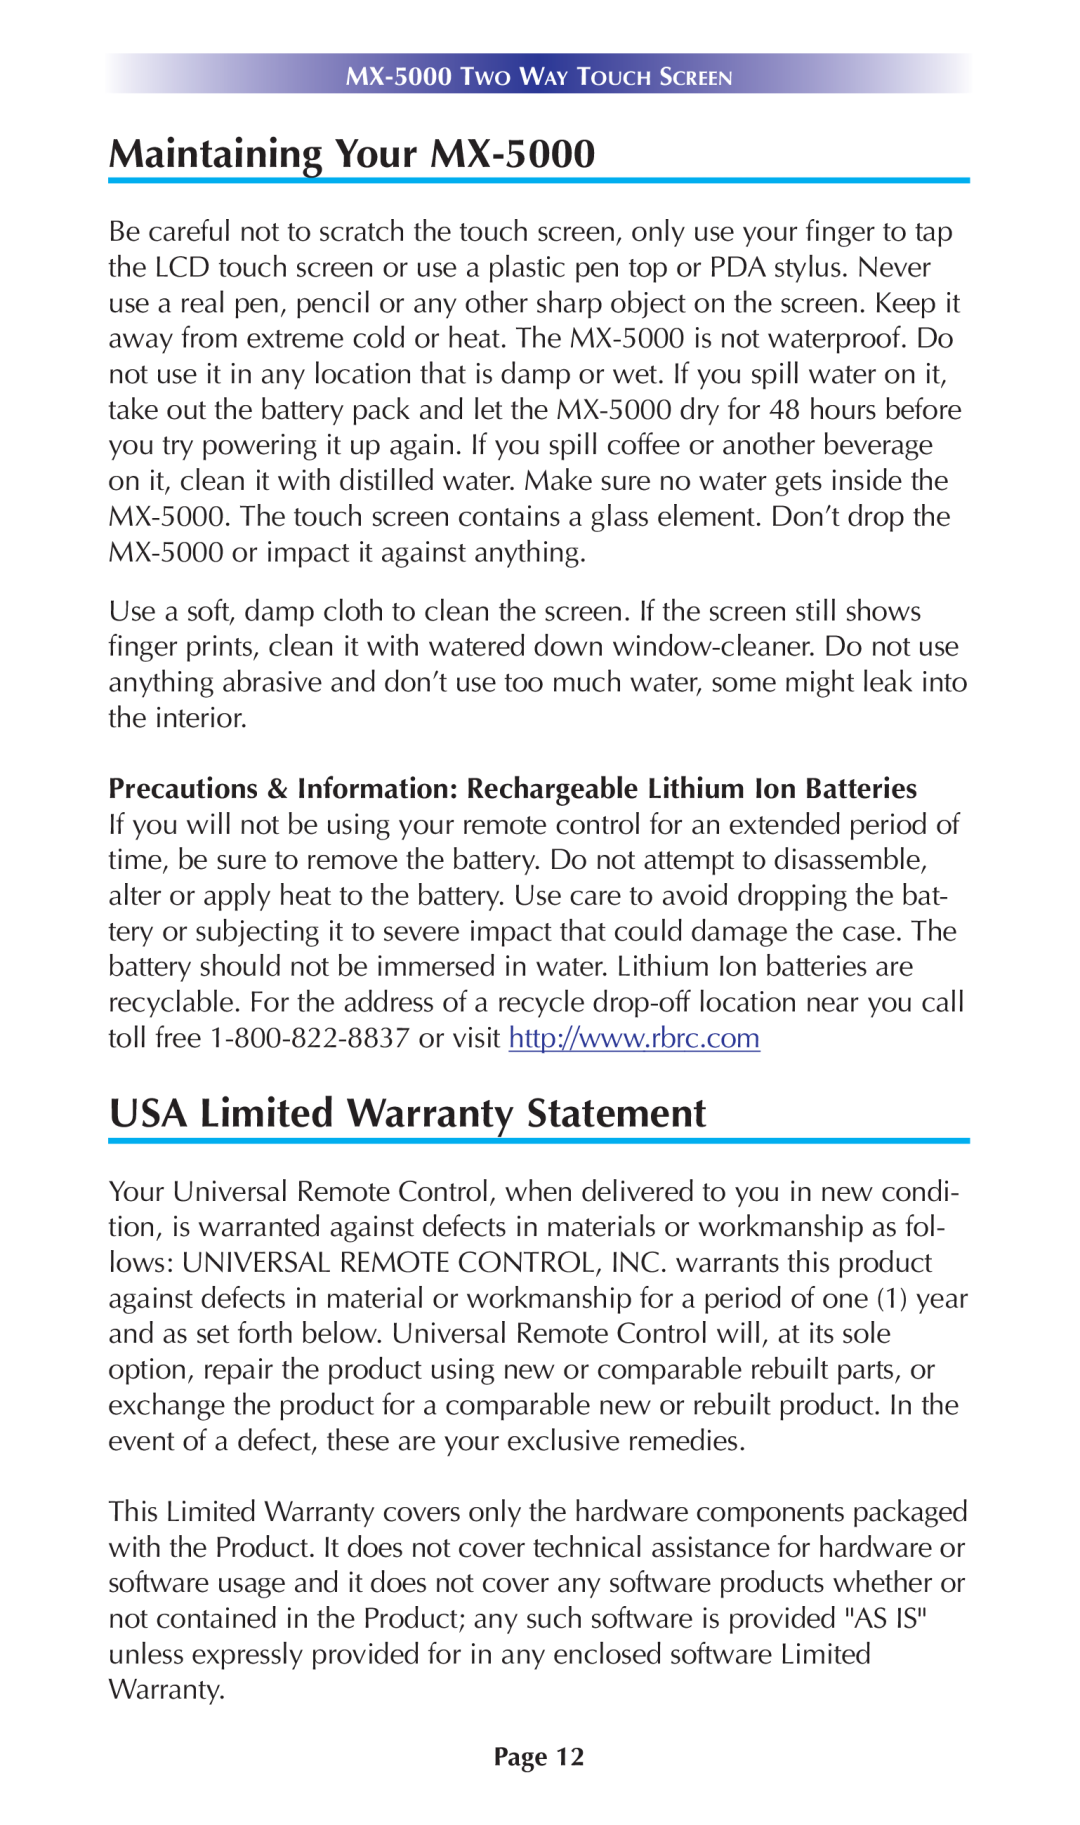 Universal Remote Control manual Maintaining Your MX-5000, USA Limited Warranty Statement 